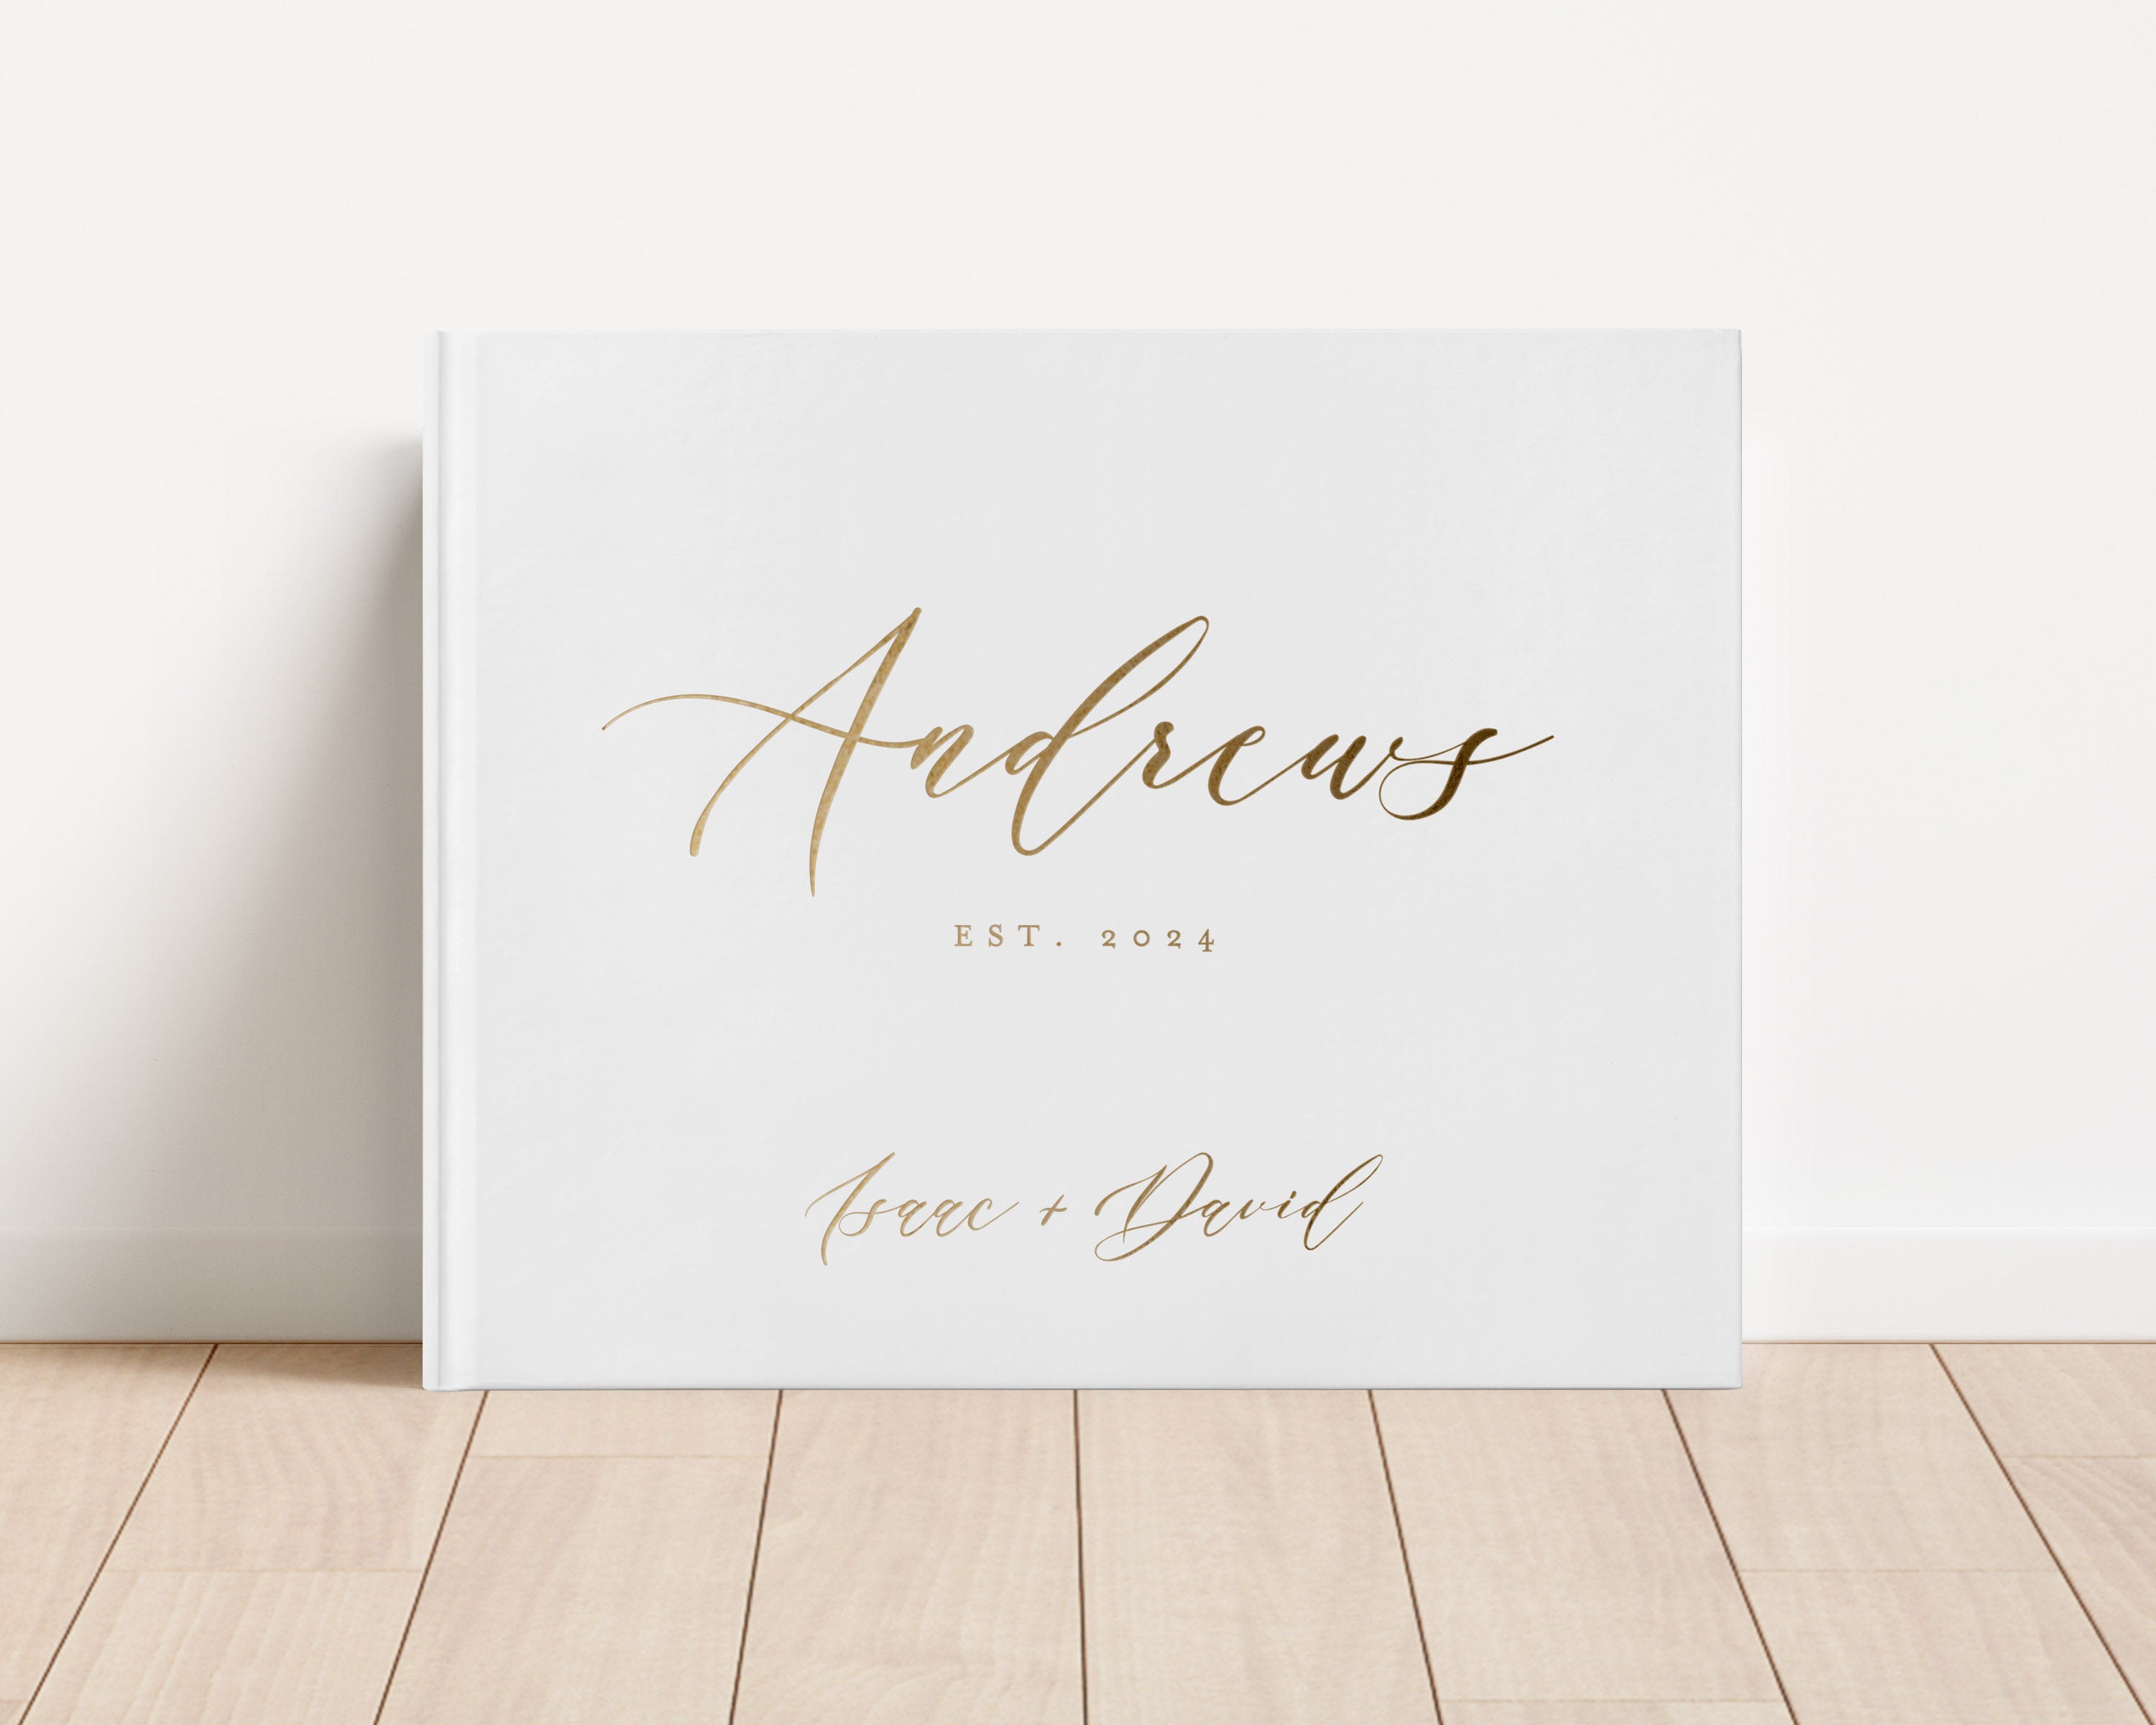 Luxury wedding guest book with custom gold foil text and white hardback cover.